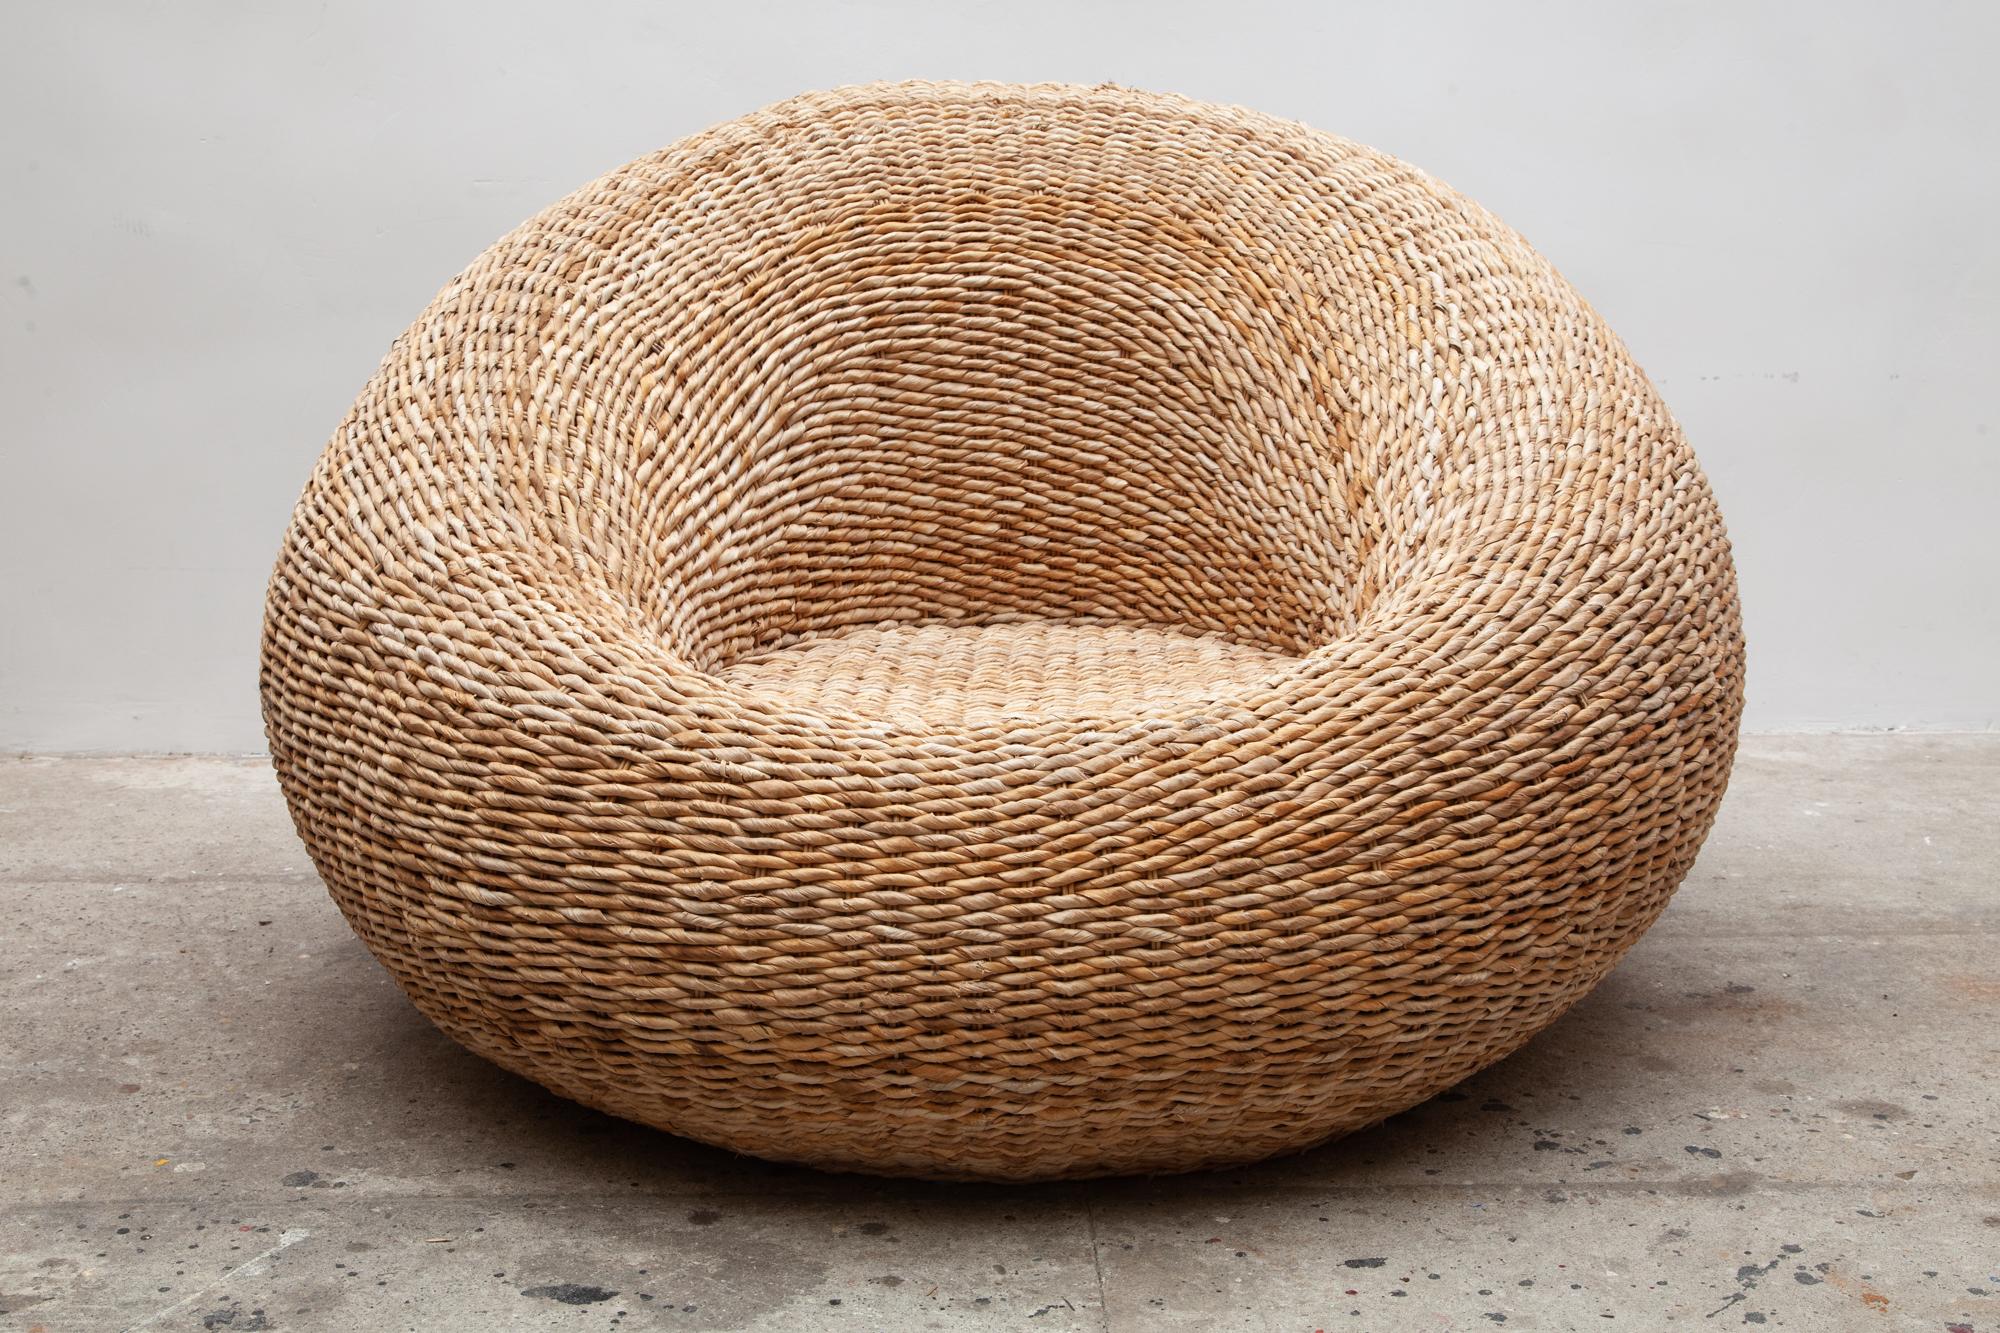 Pair of sculptural woven cord bamboo over-scale club lounge chairs in the style of Isamu Kenmochi .
Vintage circular rattan lounge chairs large structural shape very comfortable seat. Rattan is in great condition for its age.
Dimension: 120 W x 85